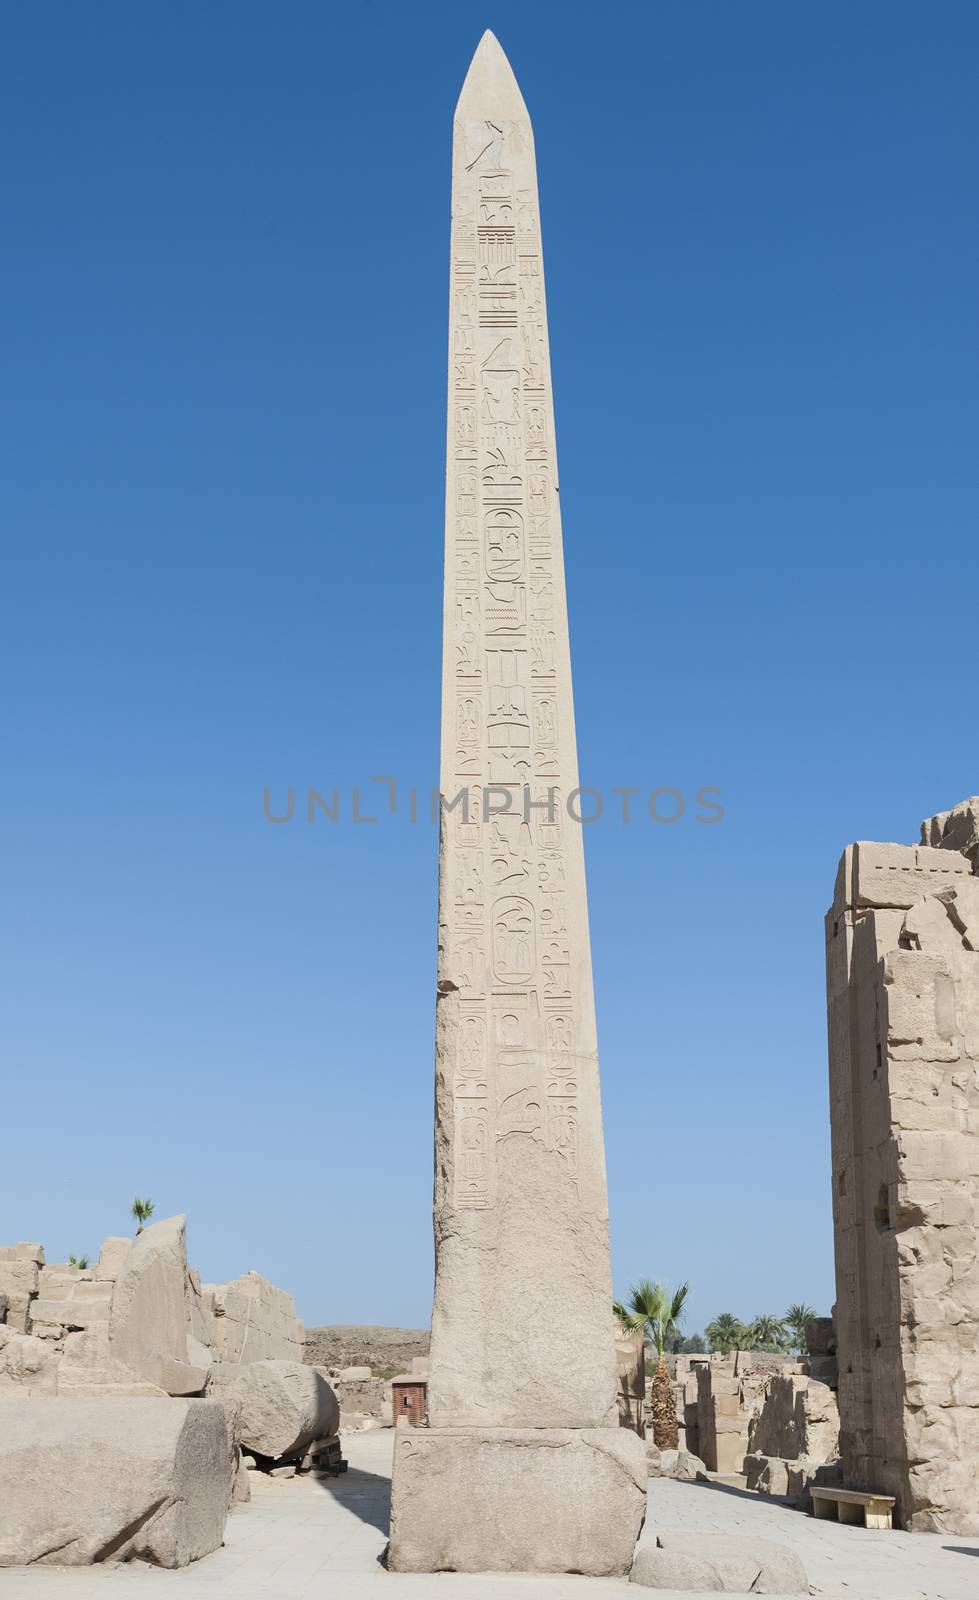 Large ancient obelisk at the temple of Karnak in Luxor